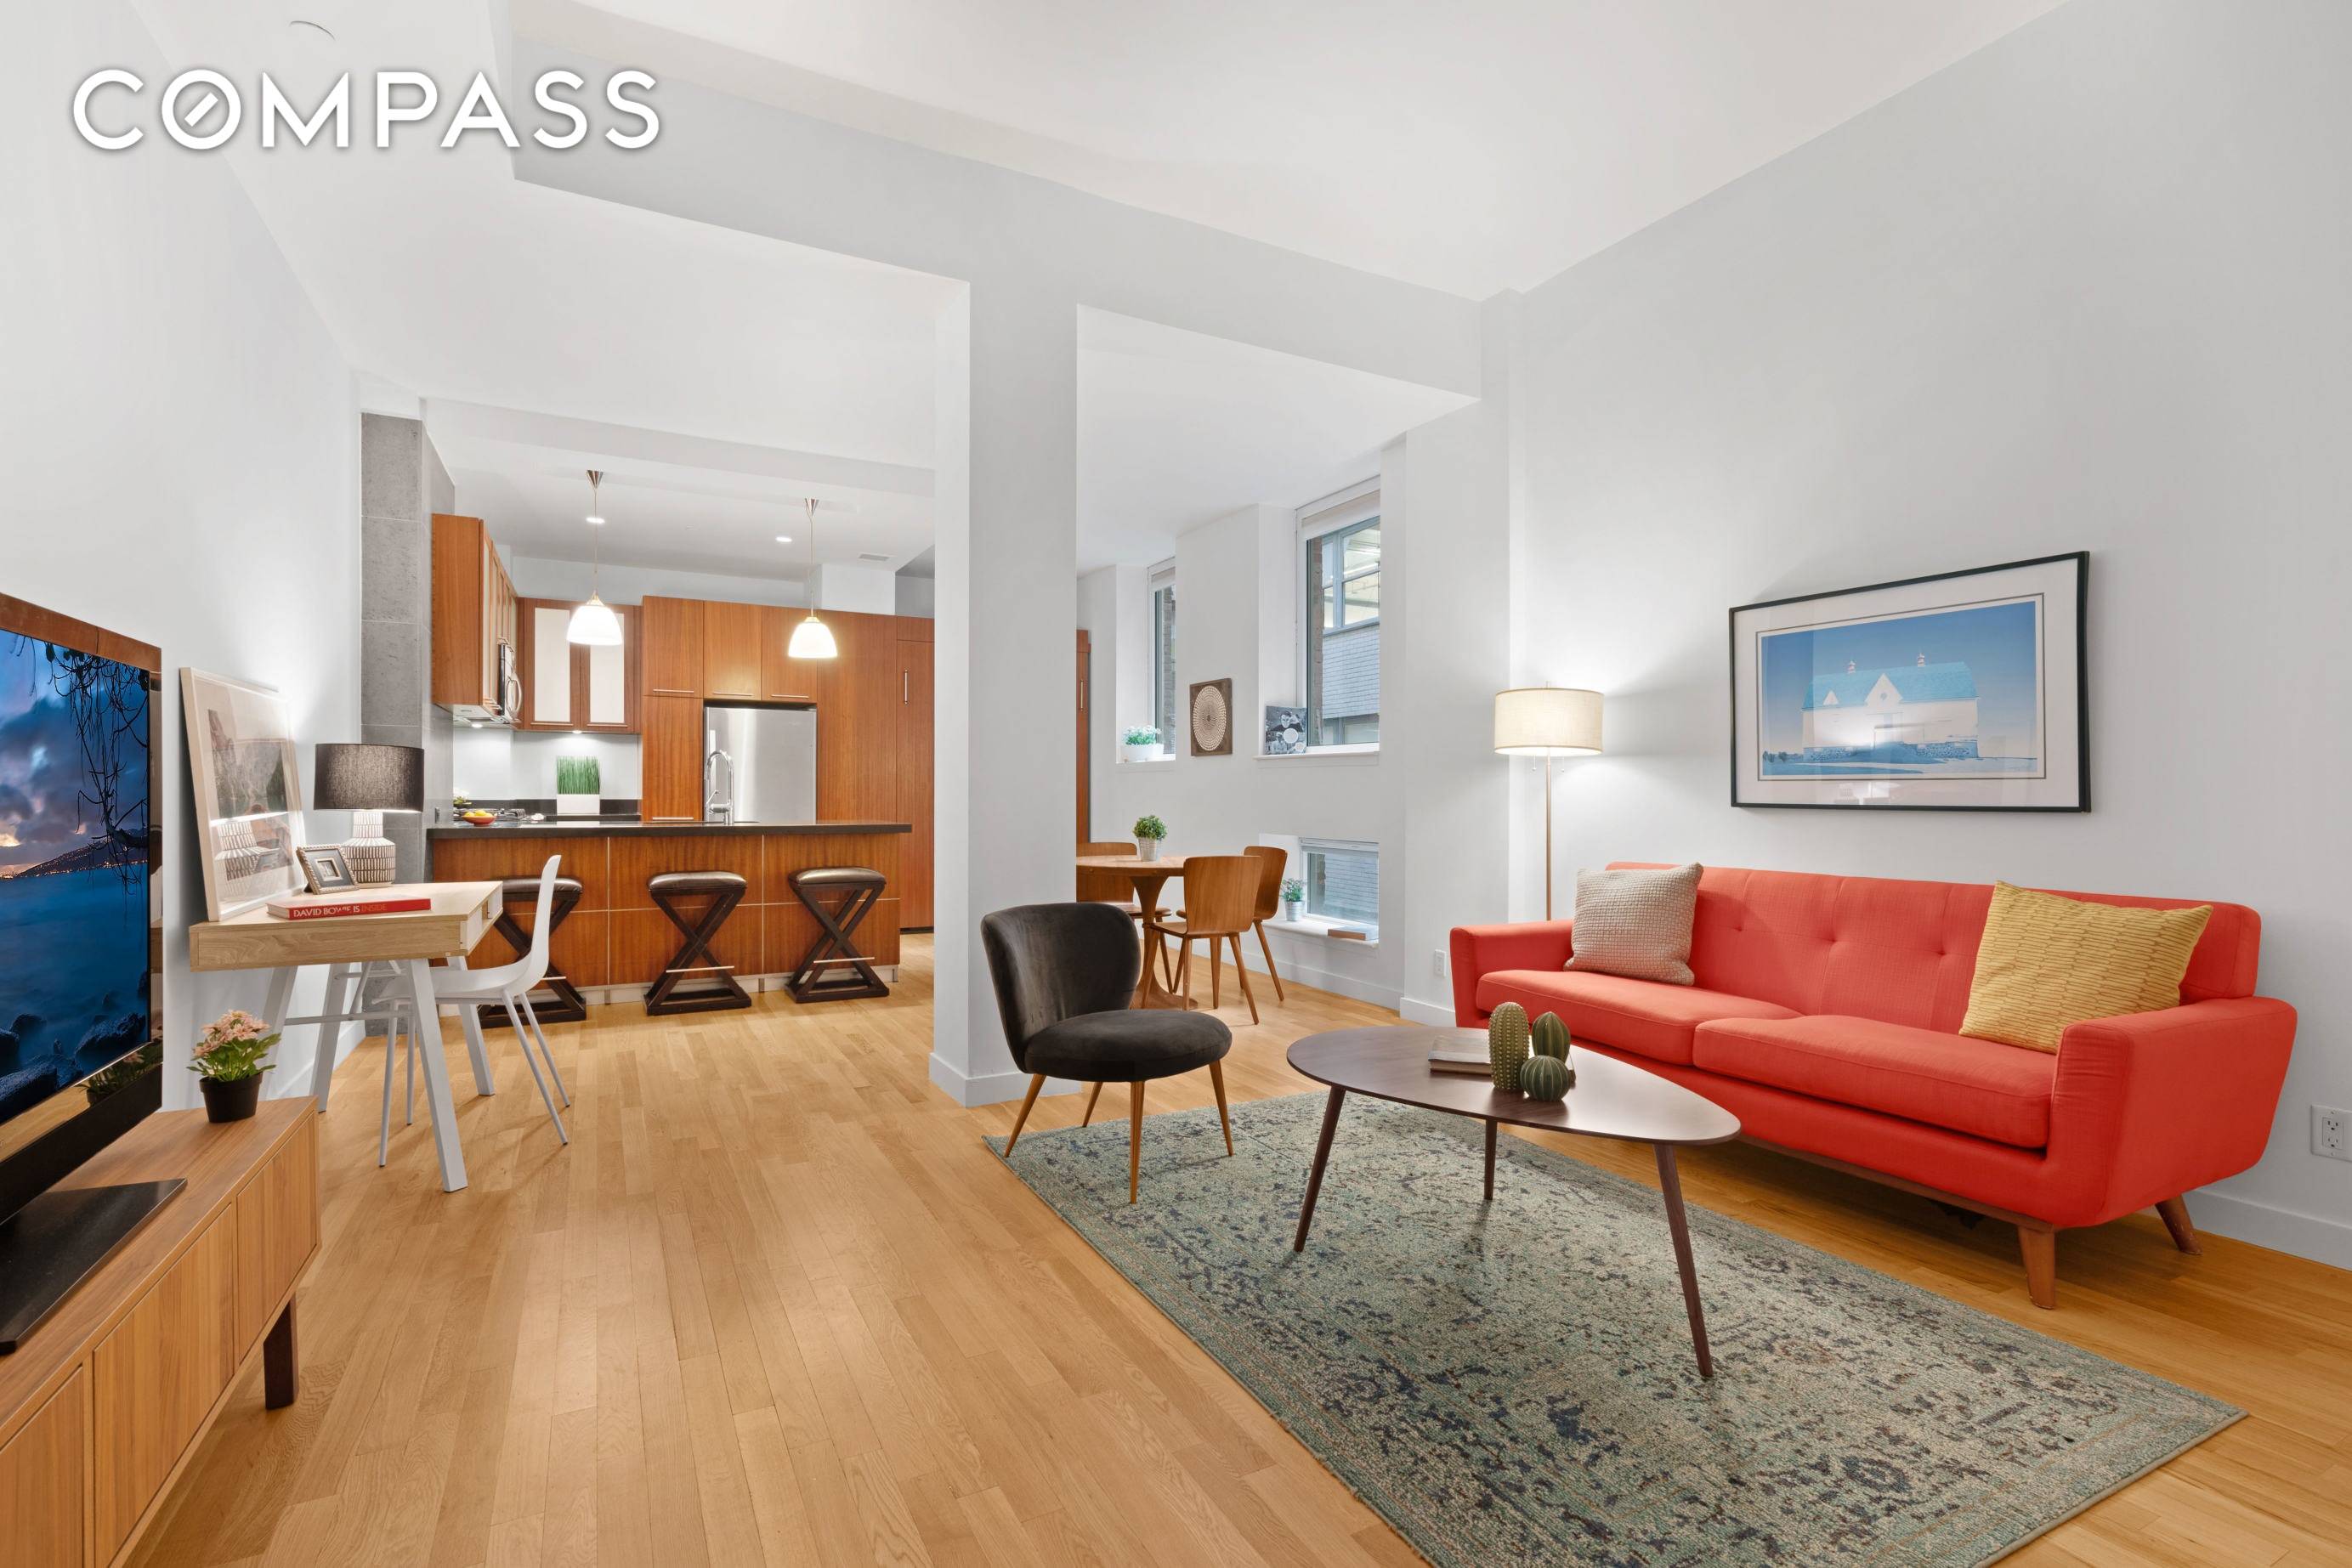 This sleek loft studio with 11' ceiling heights, oversized windows, hardwood floors and a plethora of closets is a premier choice for anyone seeking a stylish, comfortable living space in ...